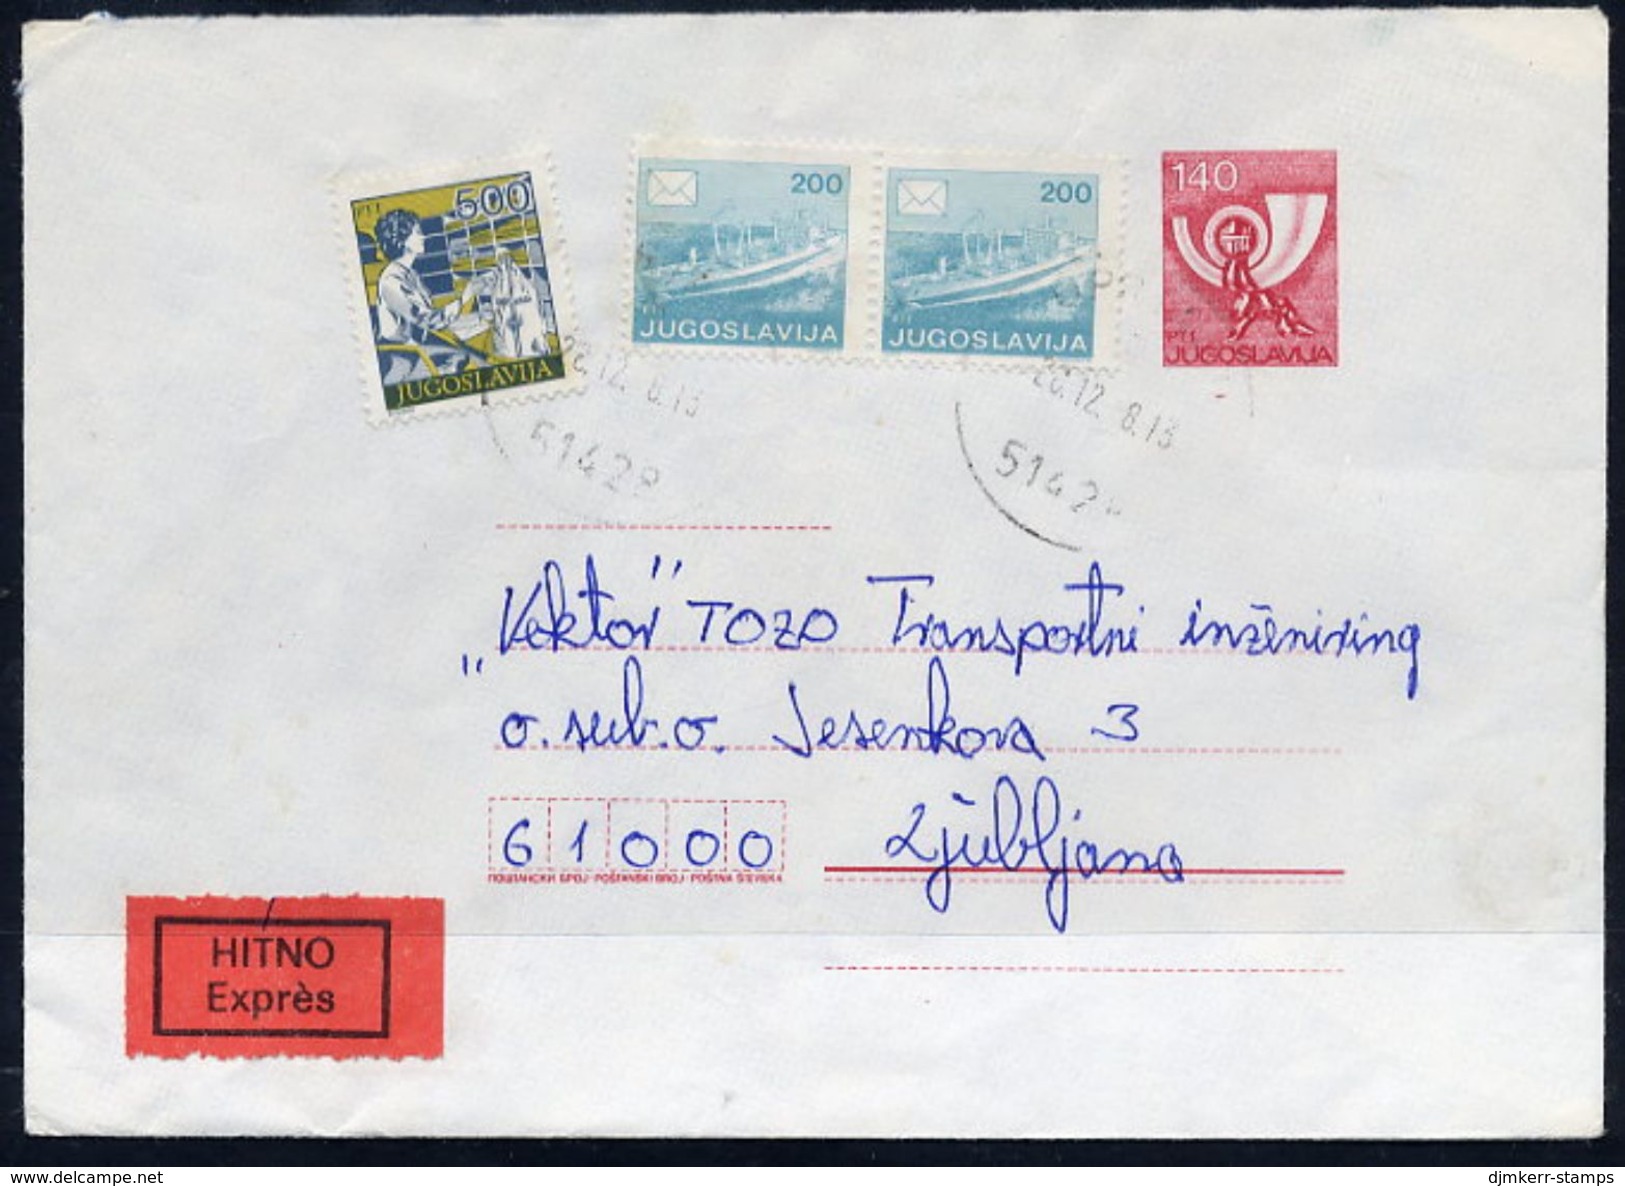 YUGOSLAVIA 1988 Posthorn 140 D.stationery Envelope  Used With Additional Franking And Express Label.  Michel U81 - Postal Stationery